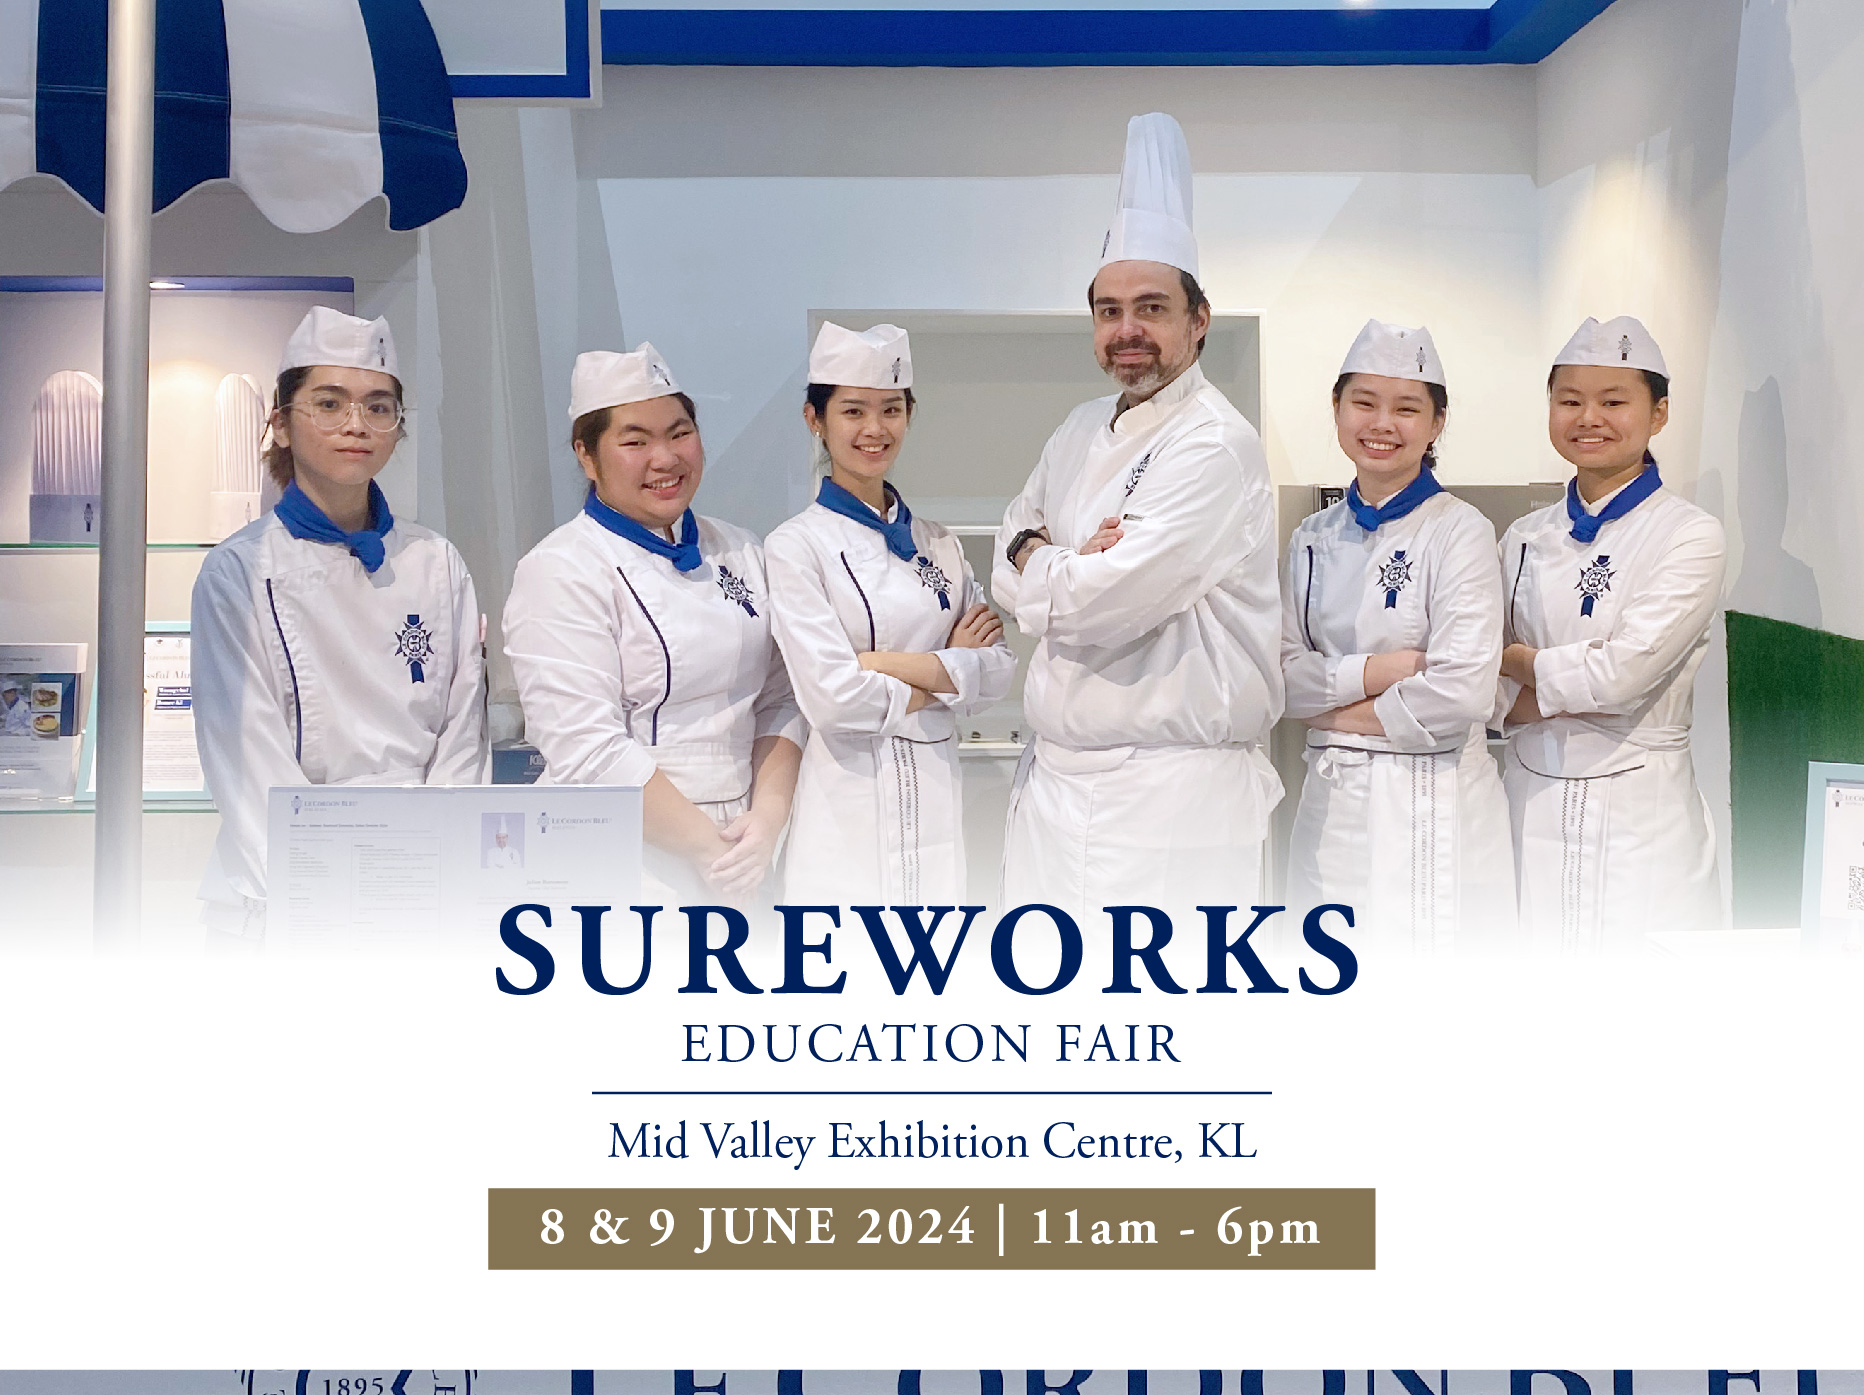 Explore Your Path to Success at this coming Sureworks Education Fair